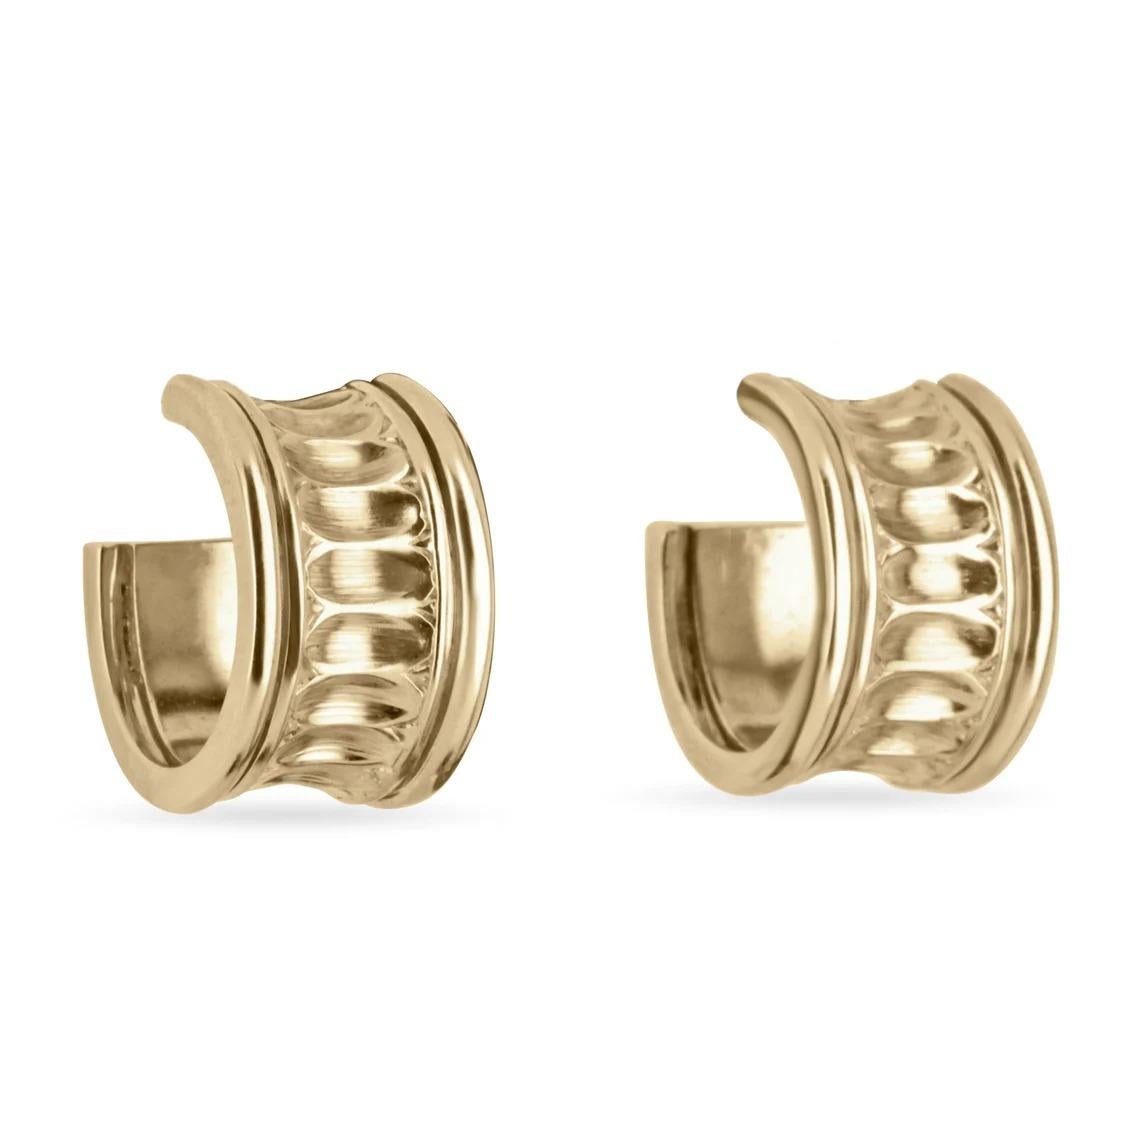 A stunning, simple, yet intricate pair of hoop earrings. Detailed design can be seen within the center ridges. The oval-like shape creates an ongoing illusion for the earrings. Crafted in gleaming 14K yellow gold, the perfect everyday hoops.